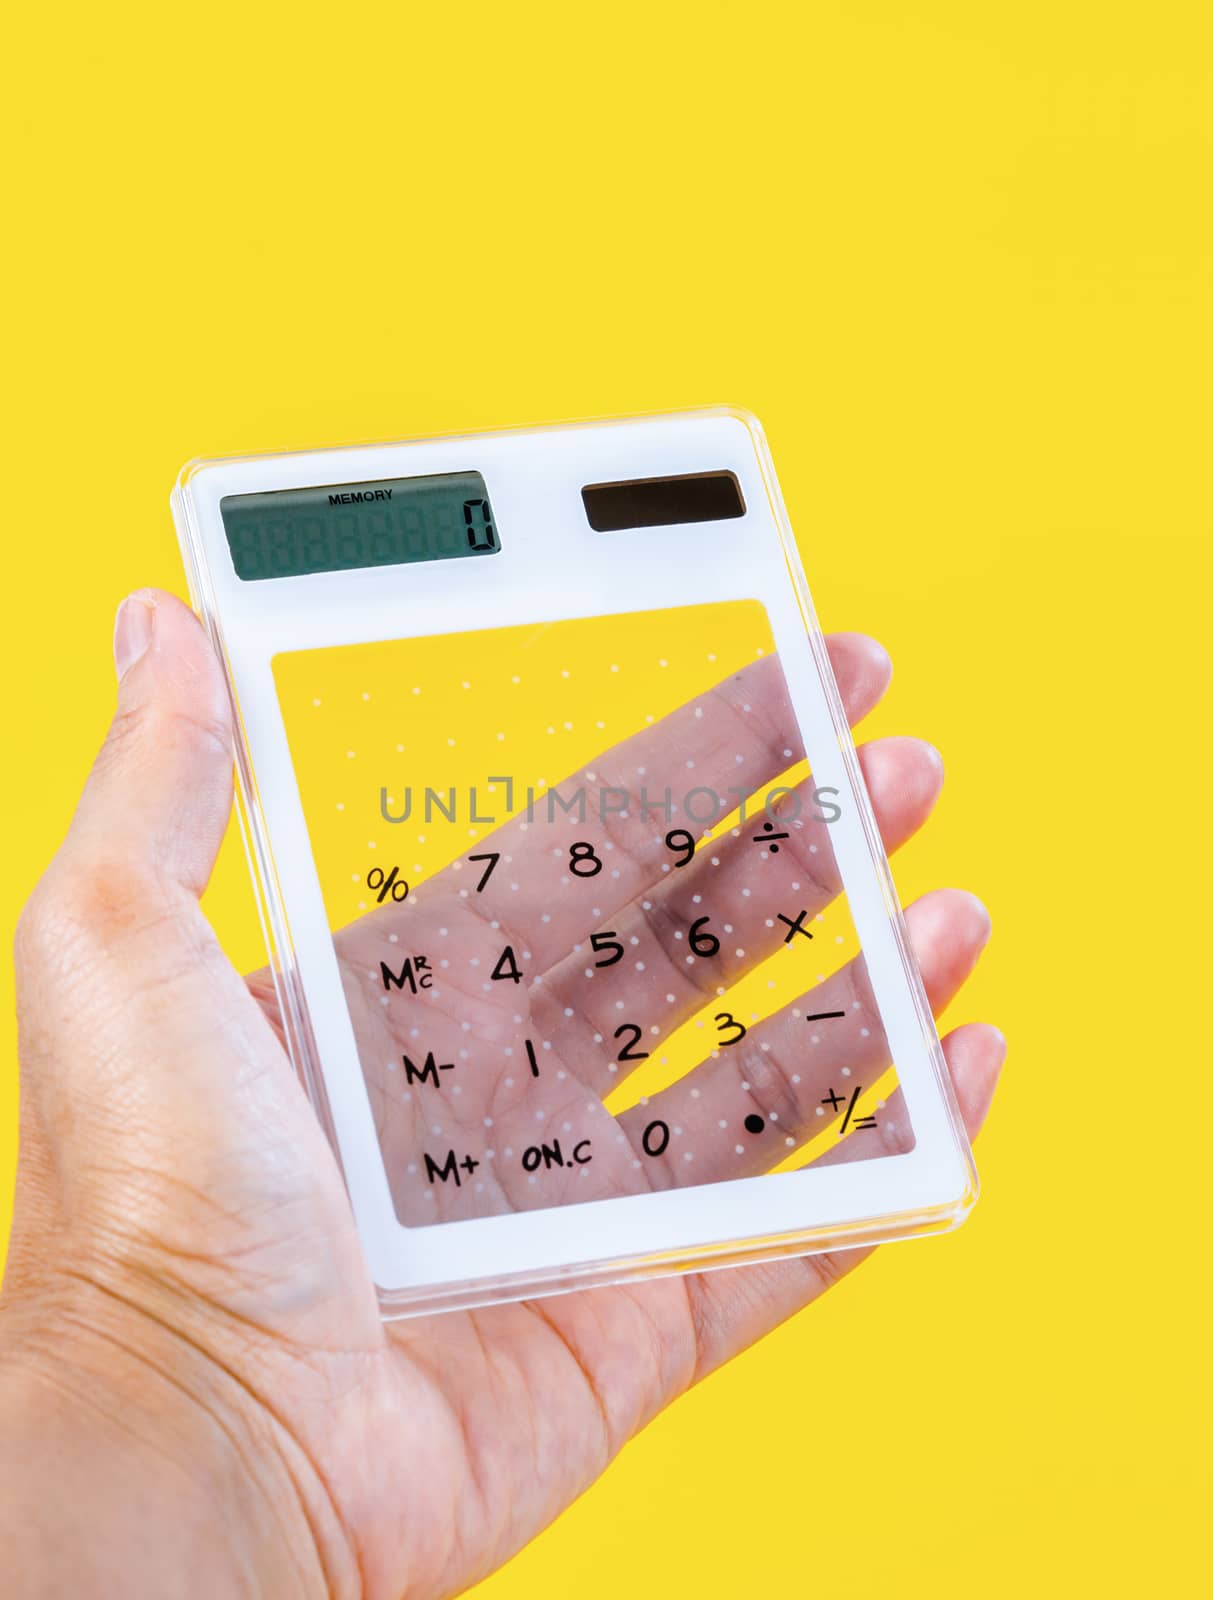 Hand showing digital calculator on yellow background.